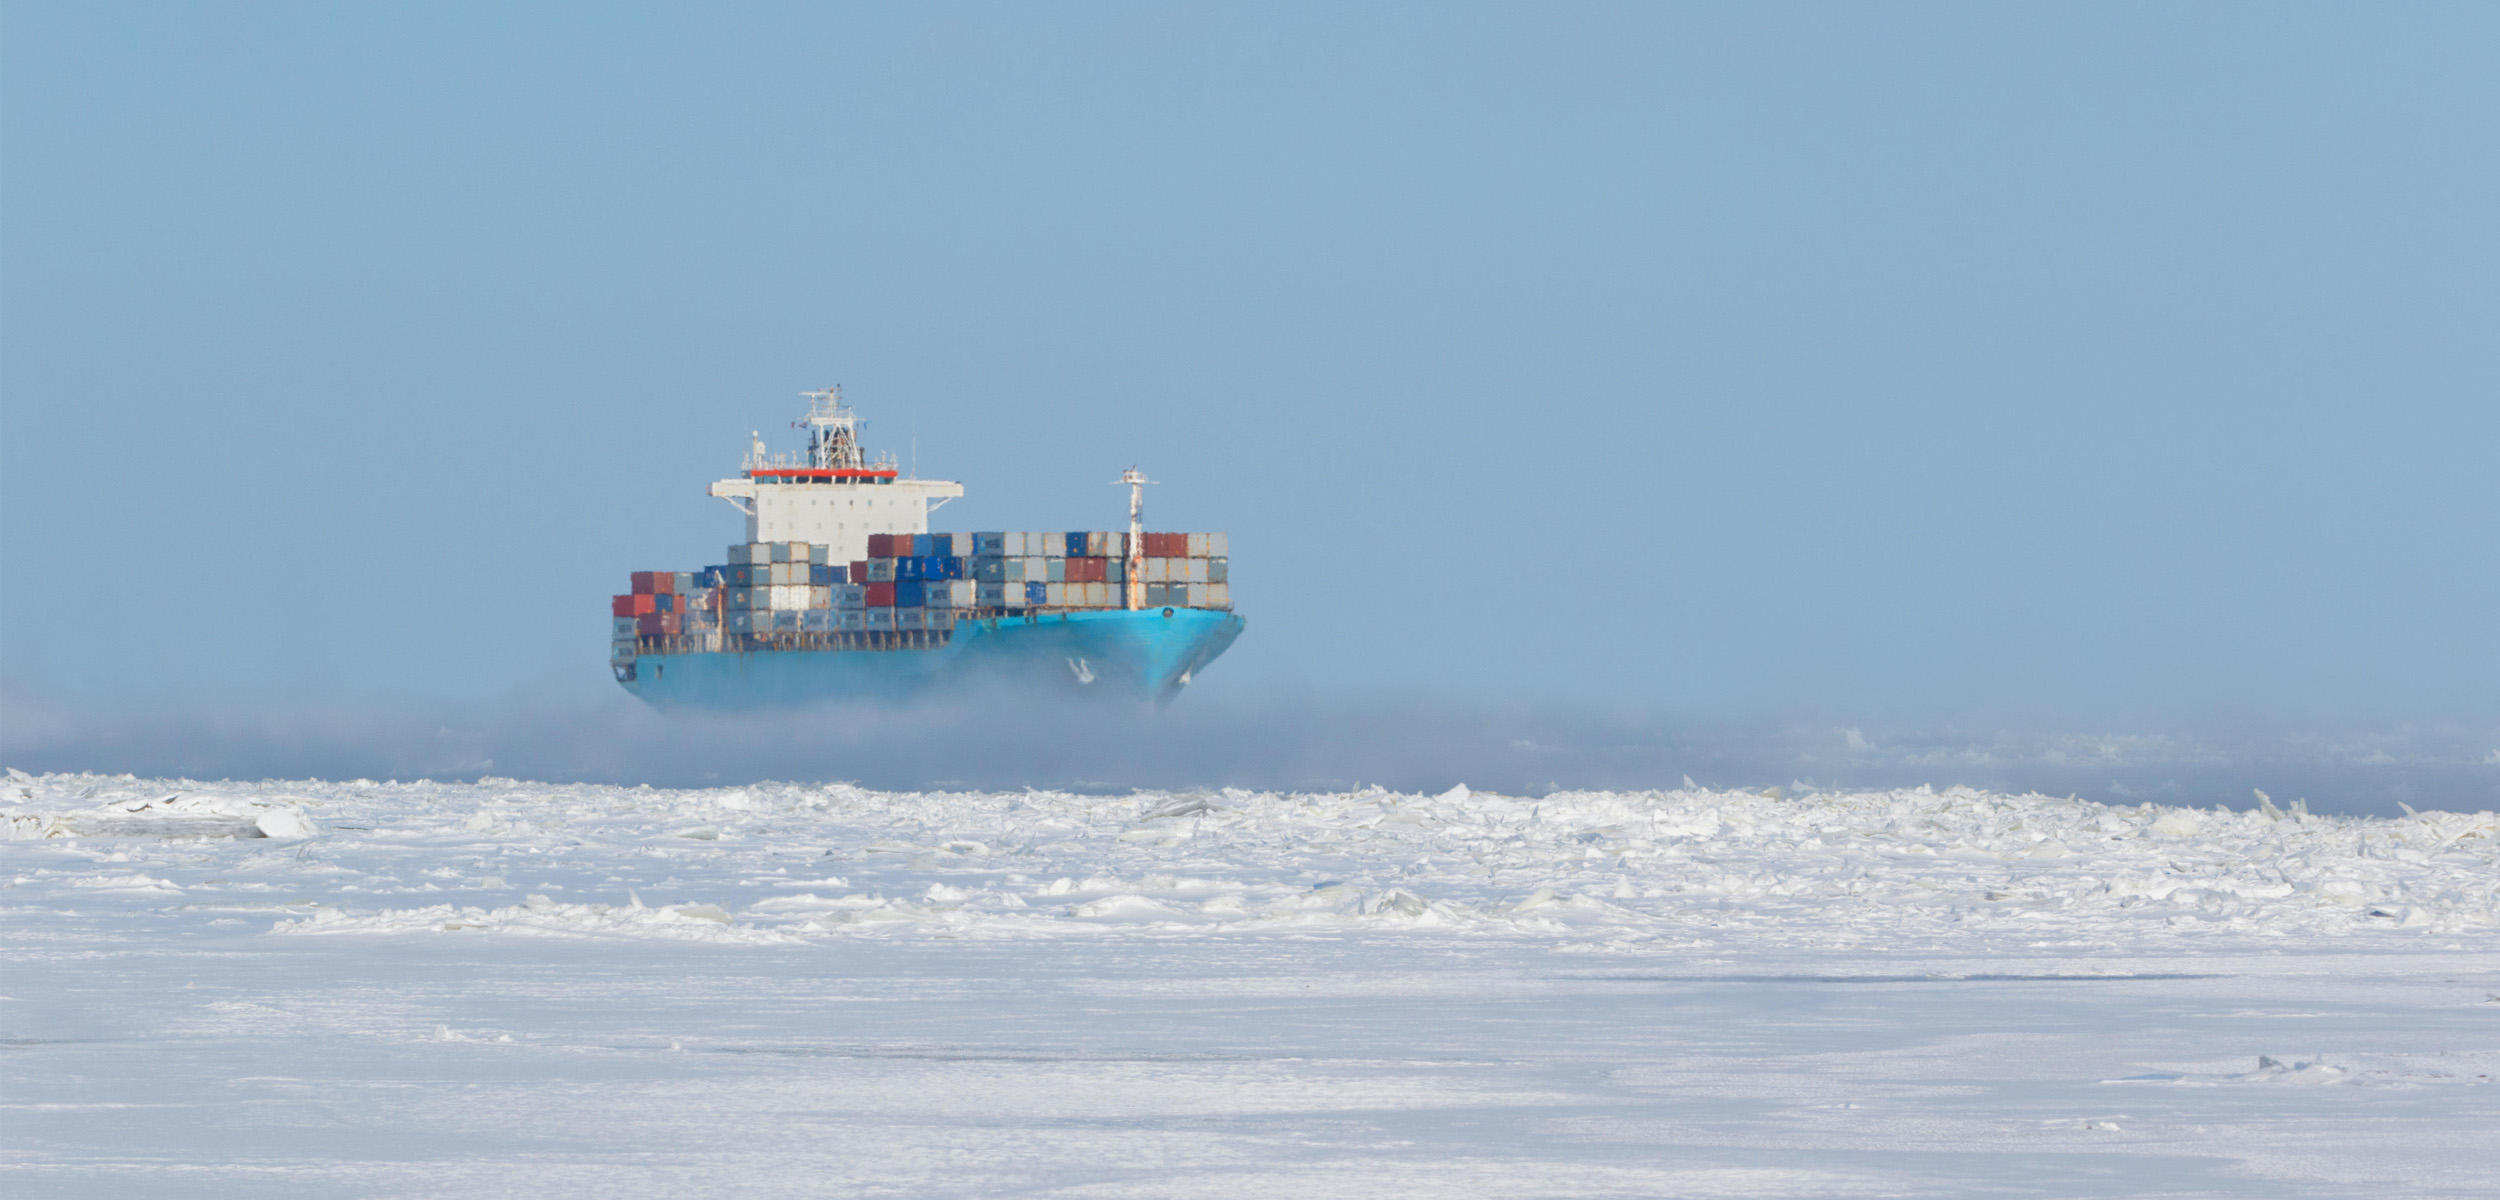 Snow packed ice sitting atop a cold ocean with a blue boat carrying shipping containers